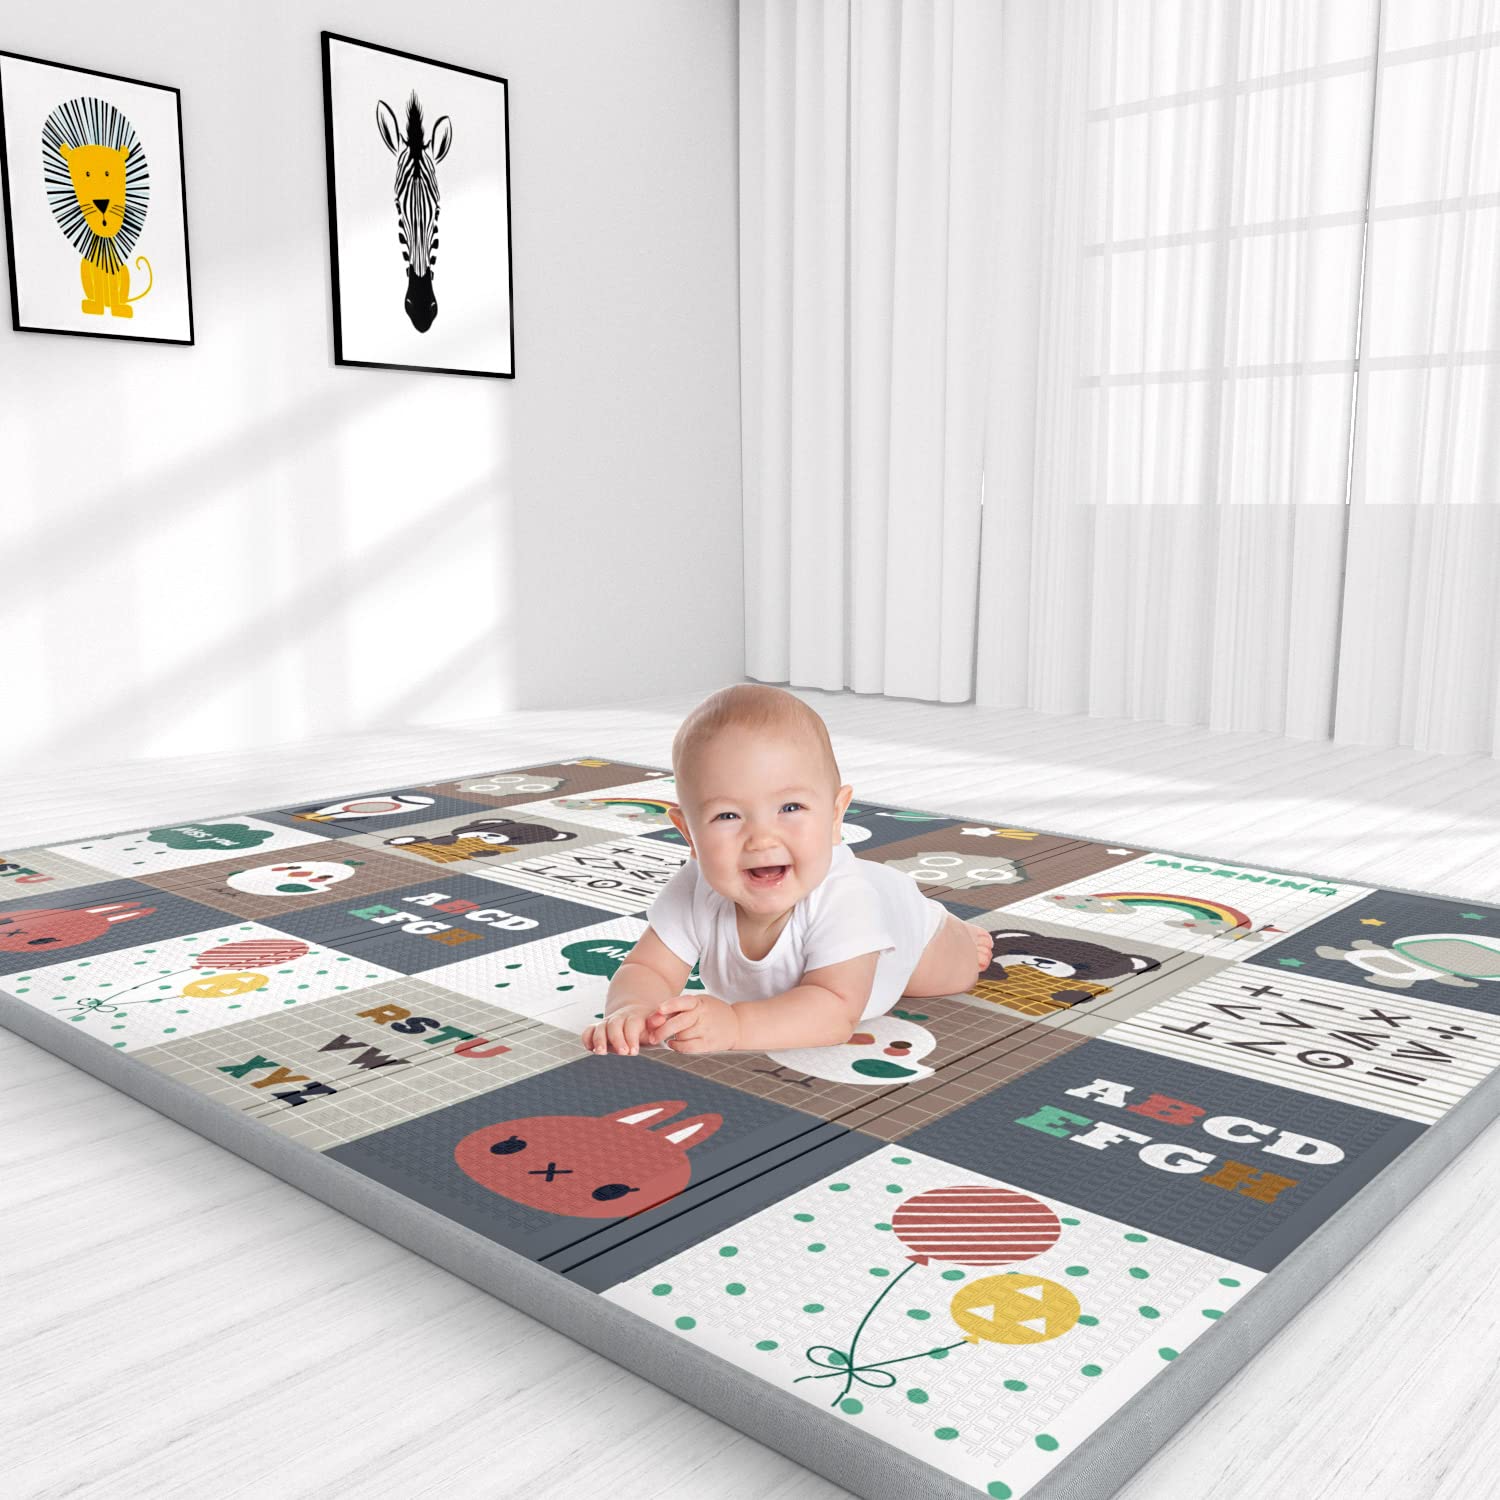 YOOVEE Foldable Baby Play Mat for Crawling, Extra Large Play Mat for Baby, Waterproof Non Toxic Anti-Slip Reversible Foam Playmat for Baby Toddlers Kids, 79